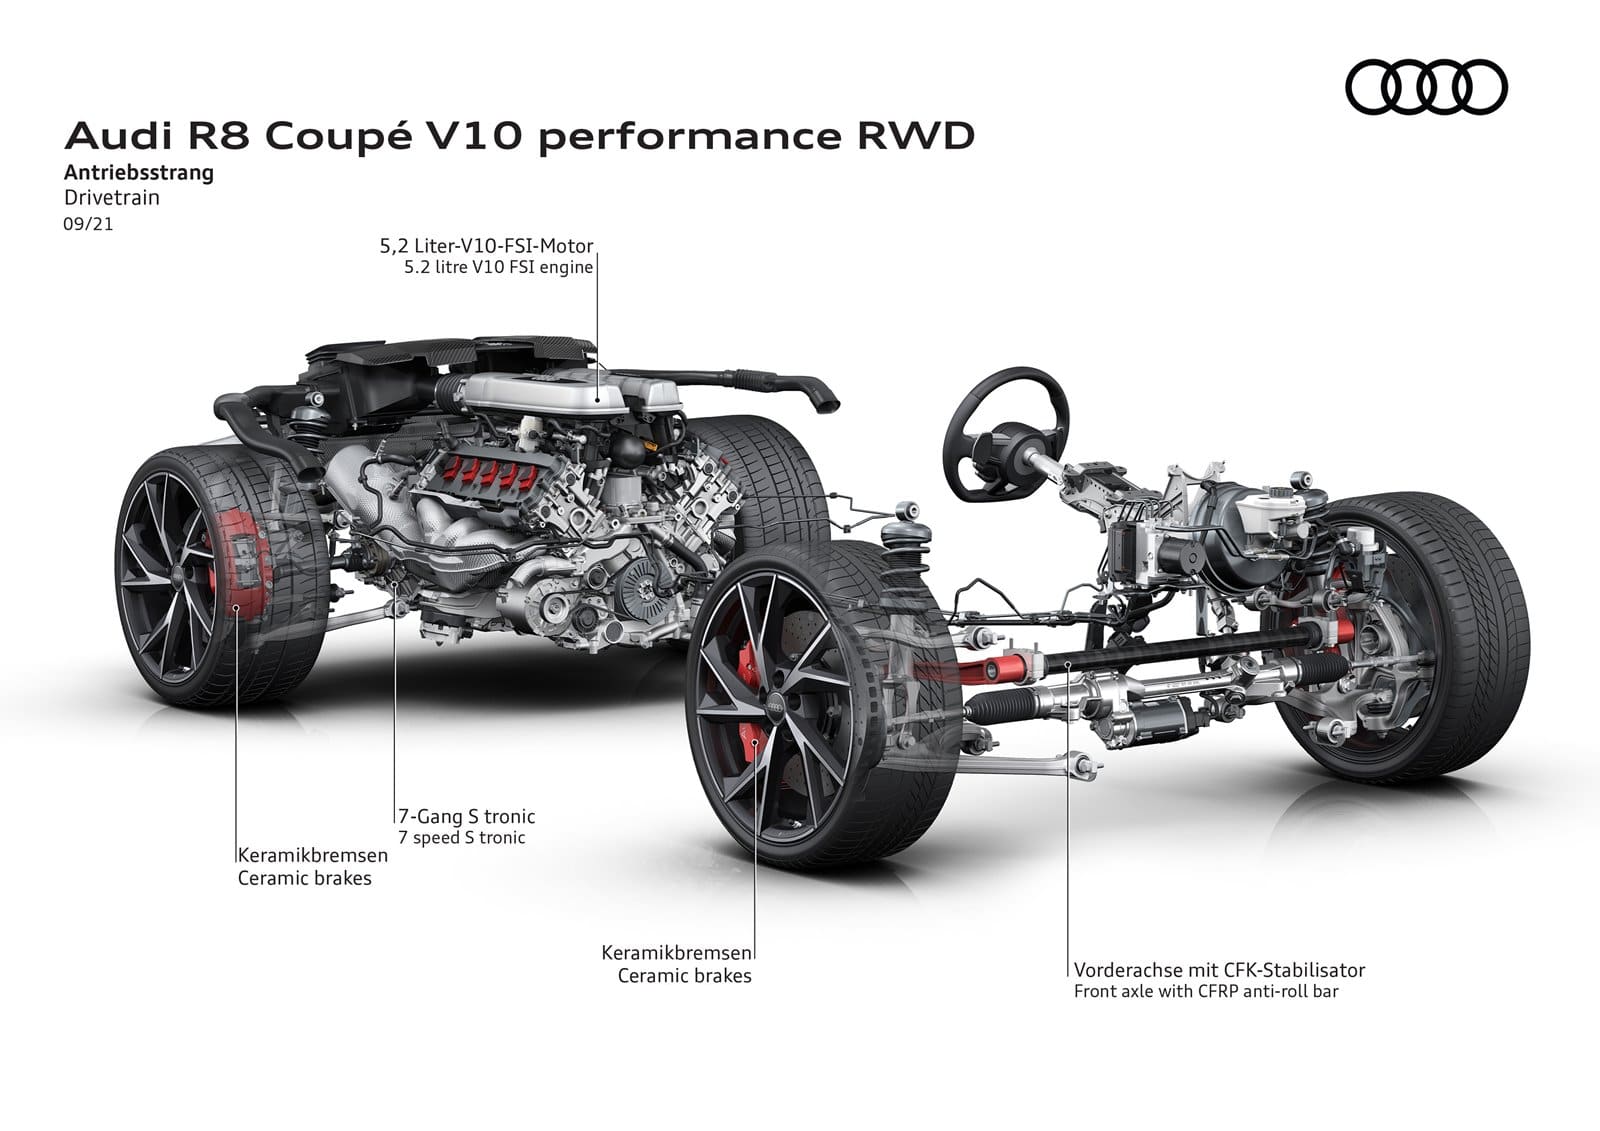 Audi R8 V10 performance RWD 2022: prices and many images